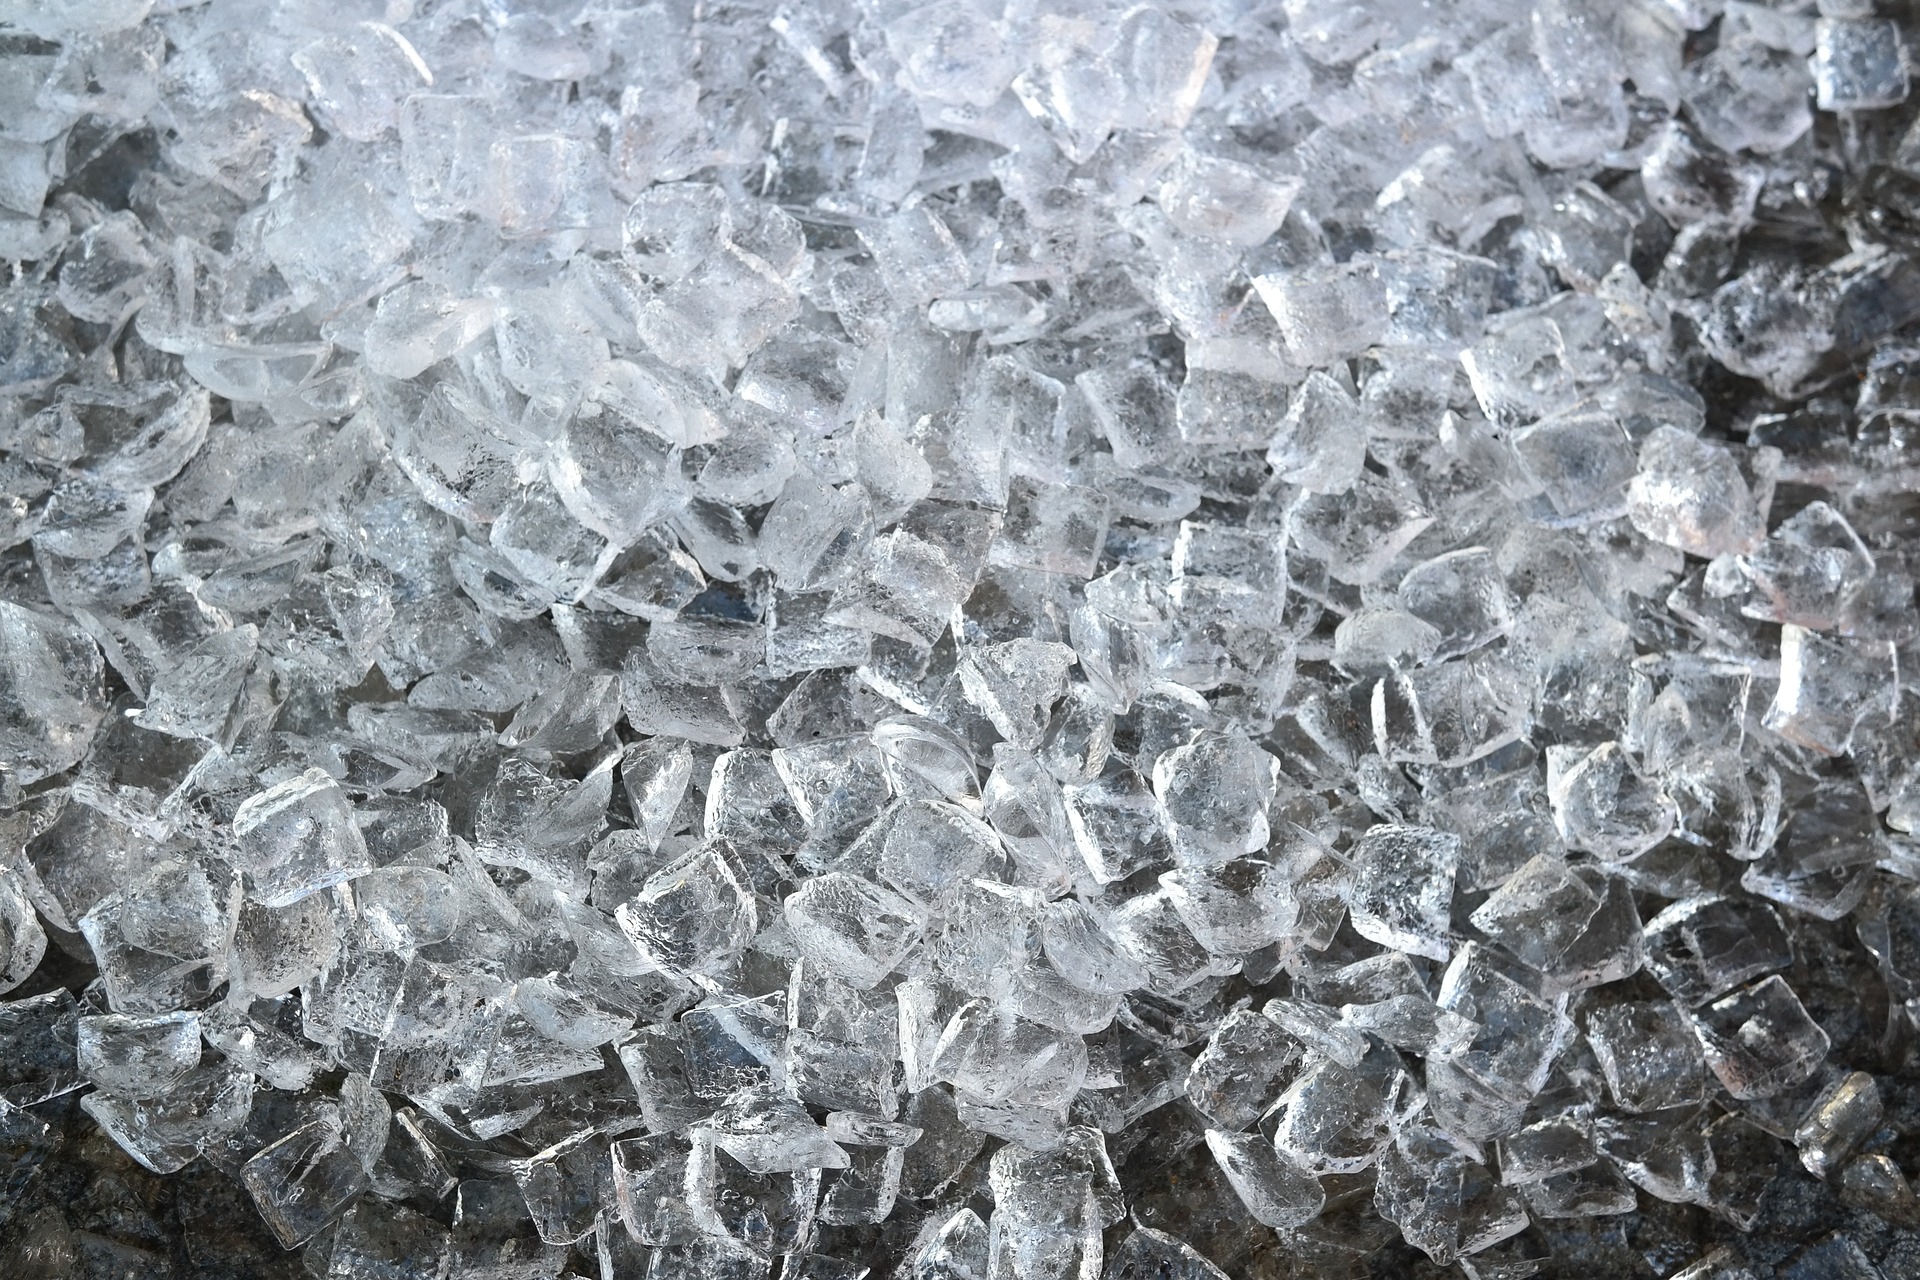 A stock image of ice cubes.